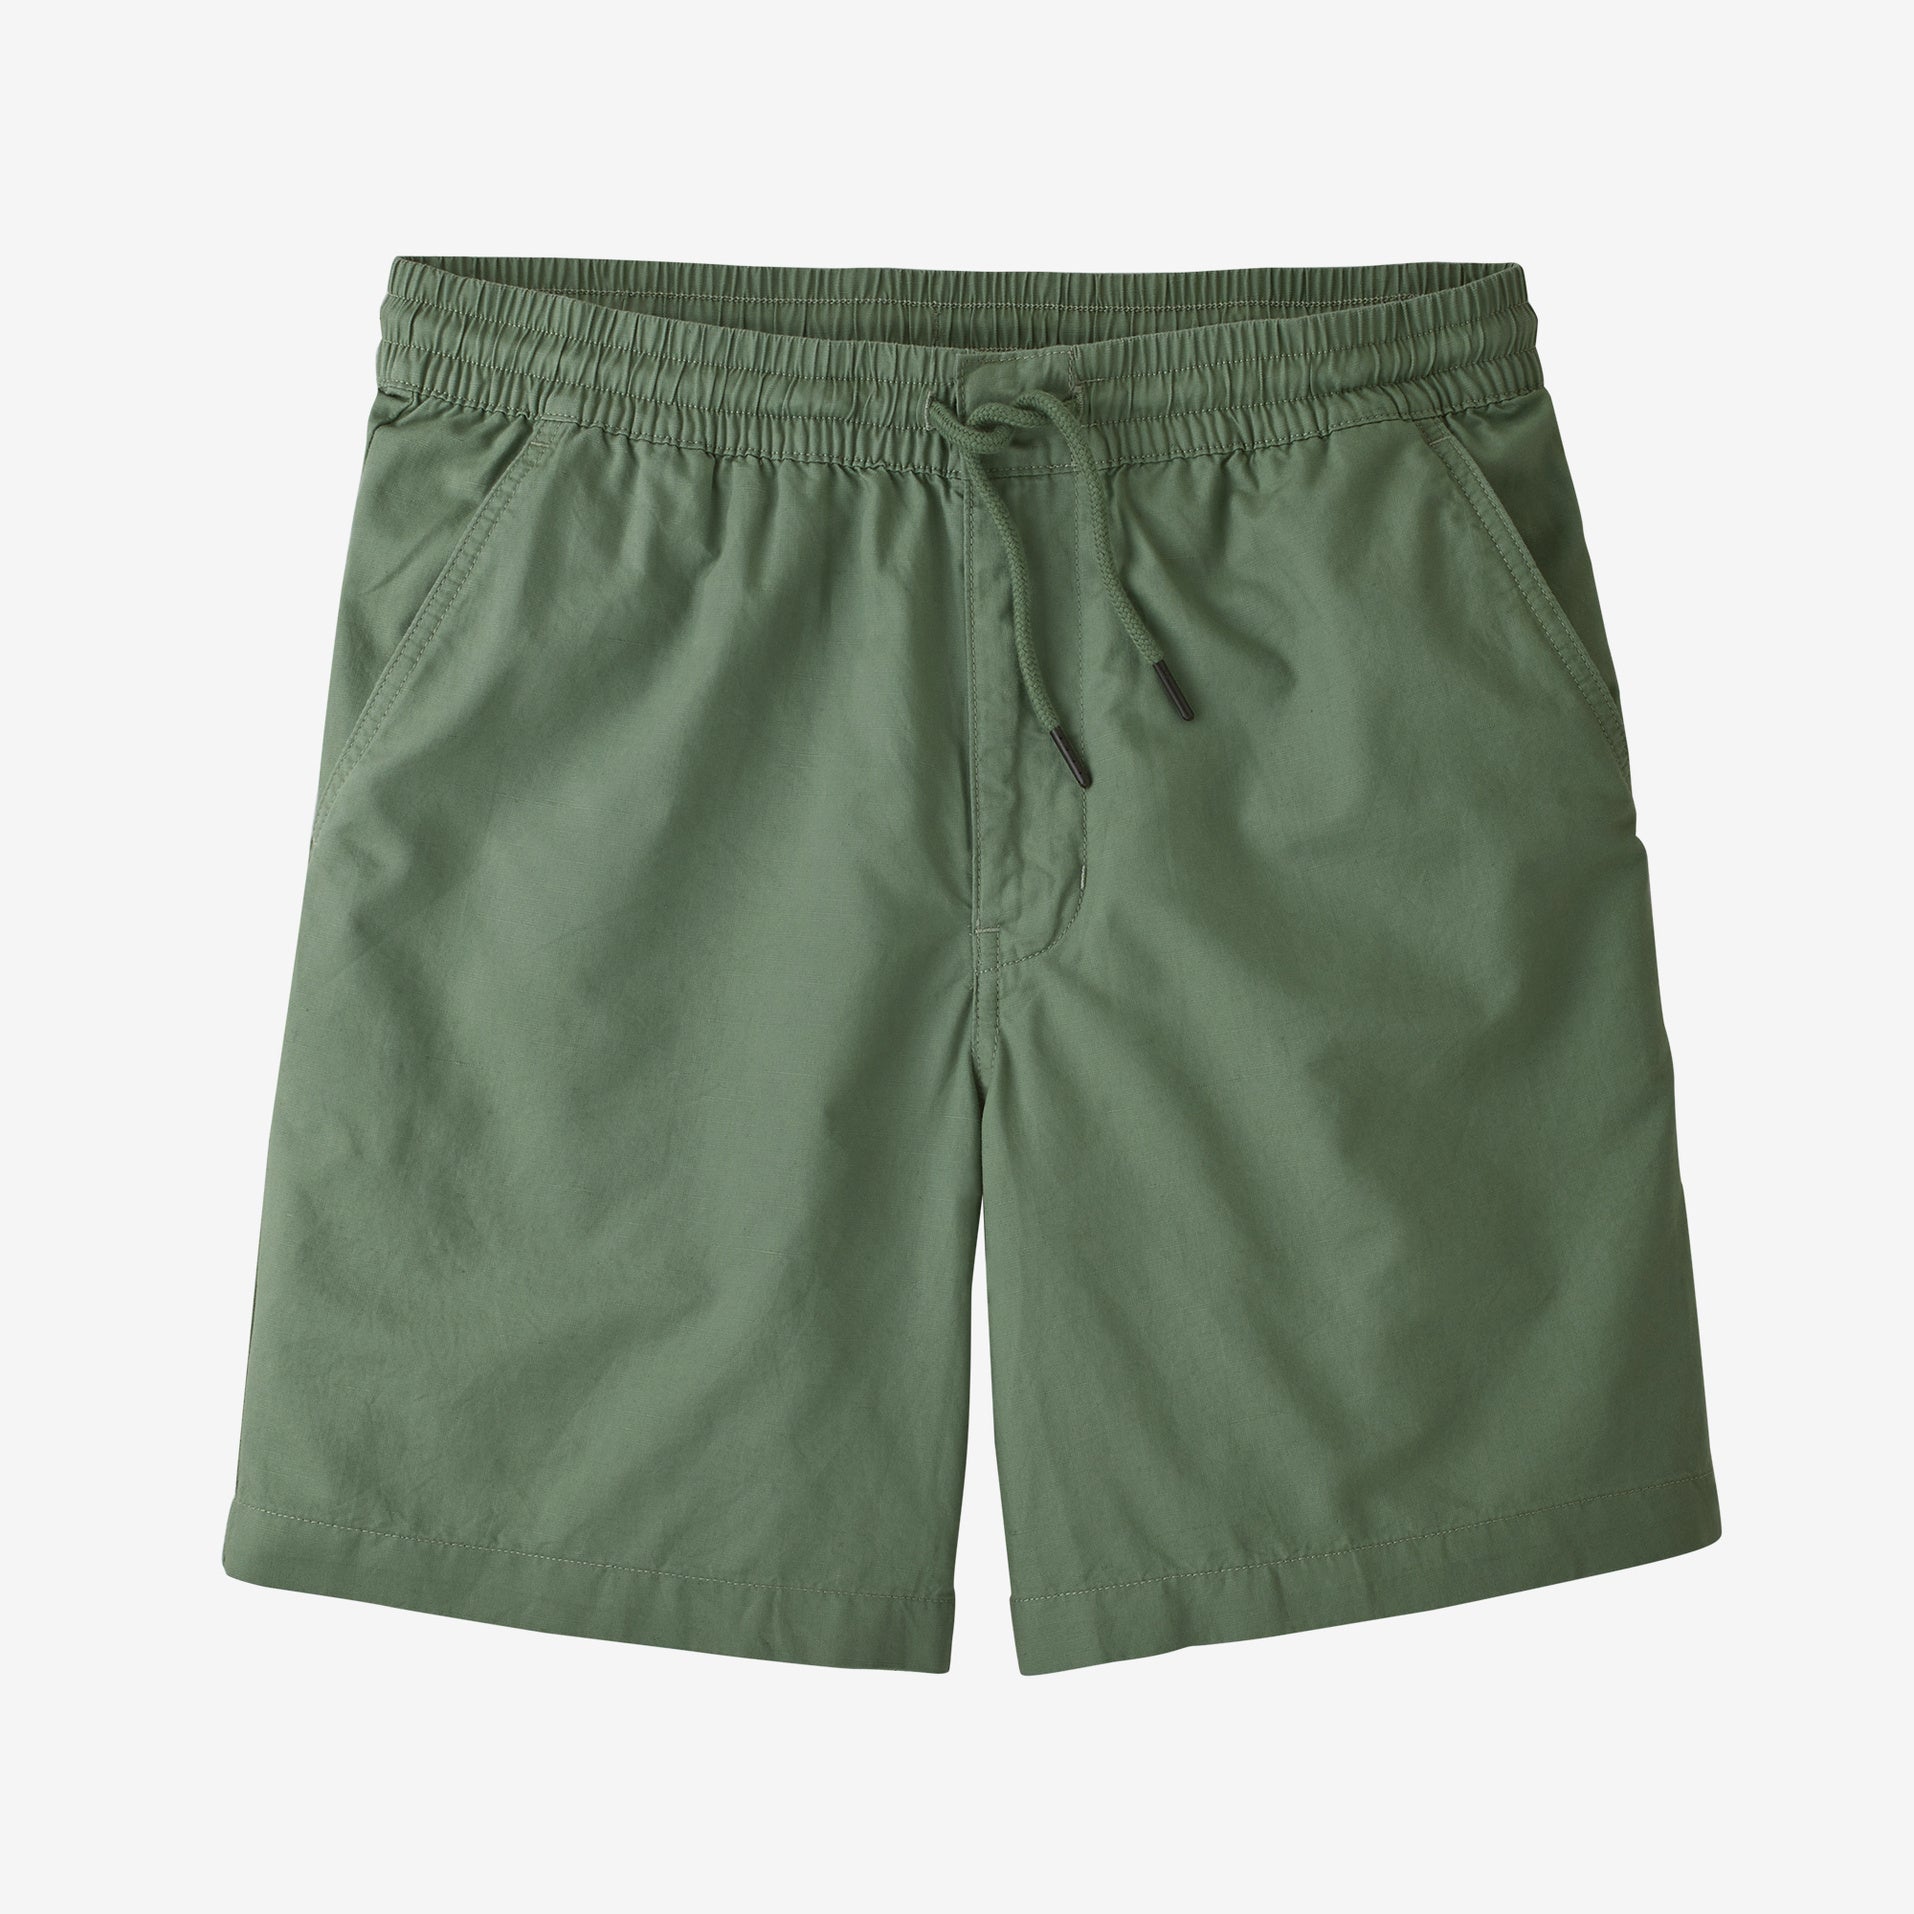 Patagonia Men's M's Light Weight All-Wear Hemp Volley Shorts Apparel Patagonia Small Sedge Green-SEGN 